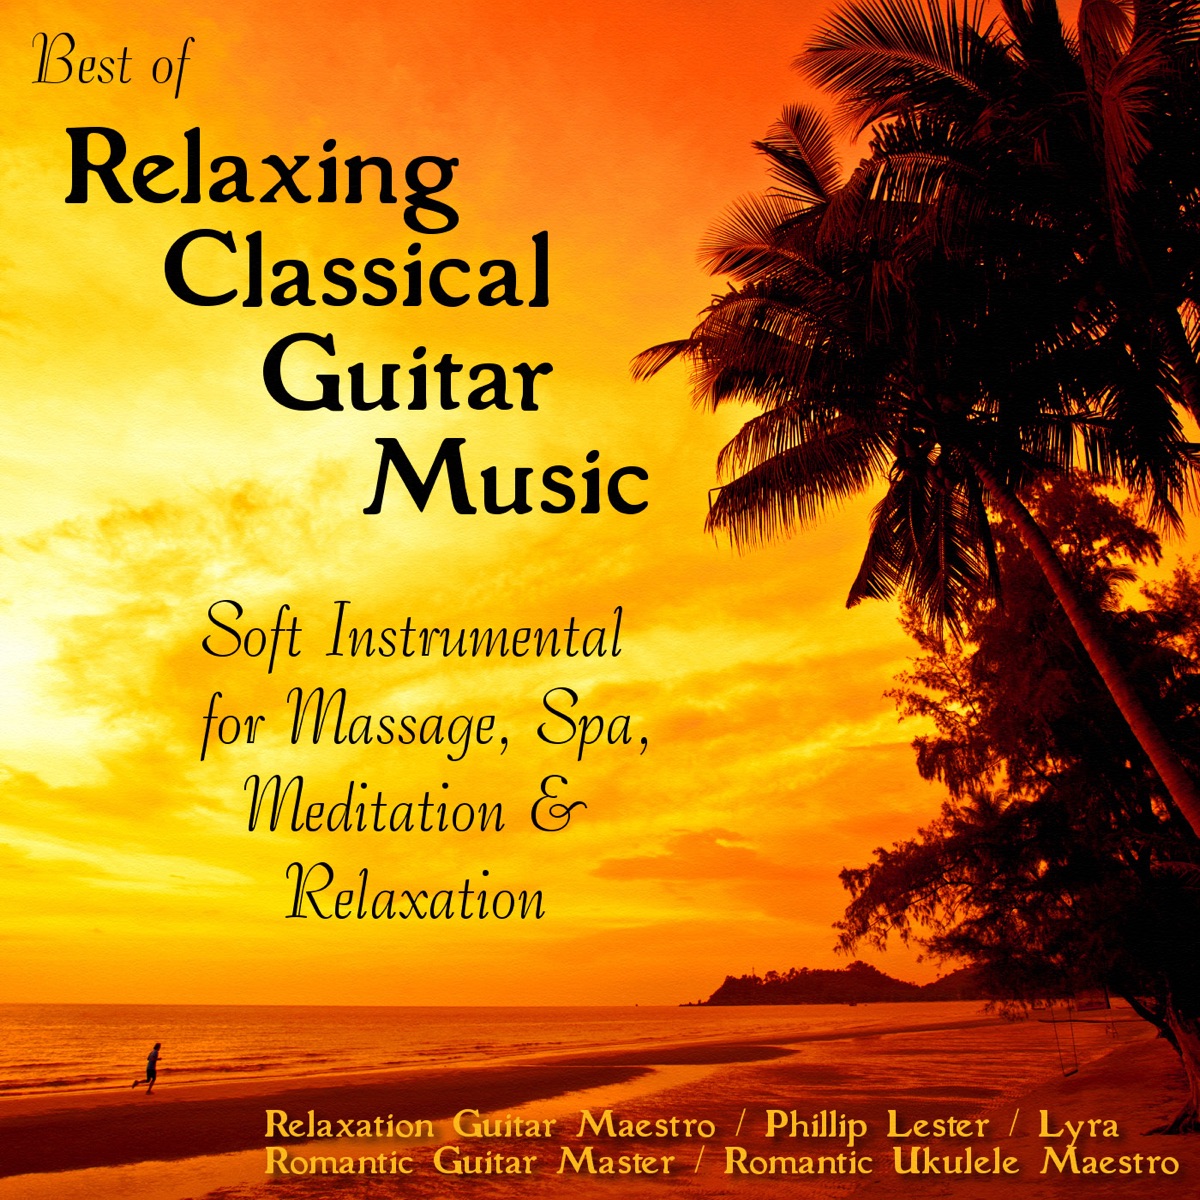 Best of Relaxing Classical Guitar Music: Soft Instrumental for Massage,  Spa, Meditation & Relaxation - Album by Various Artists - Apple Music